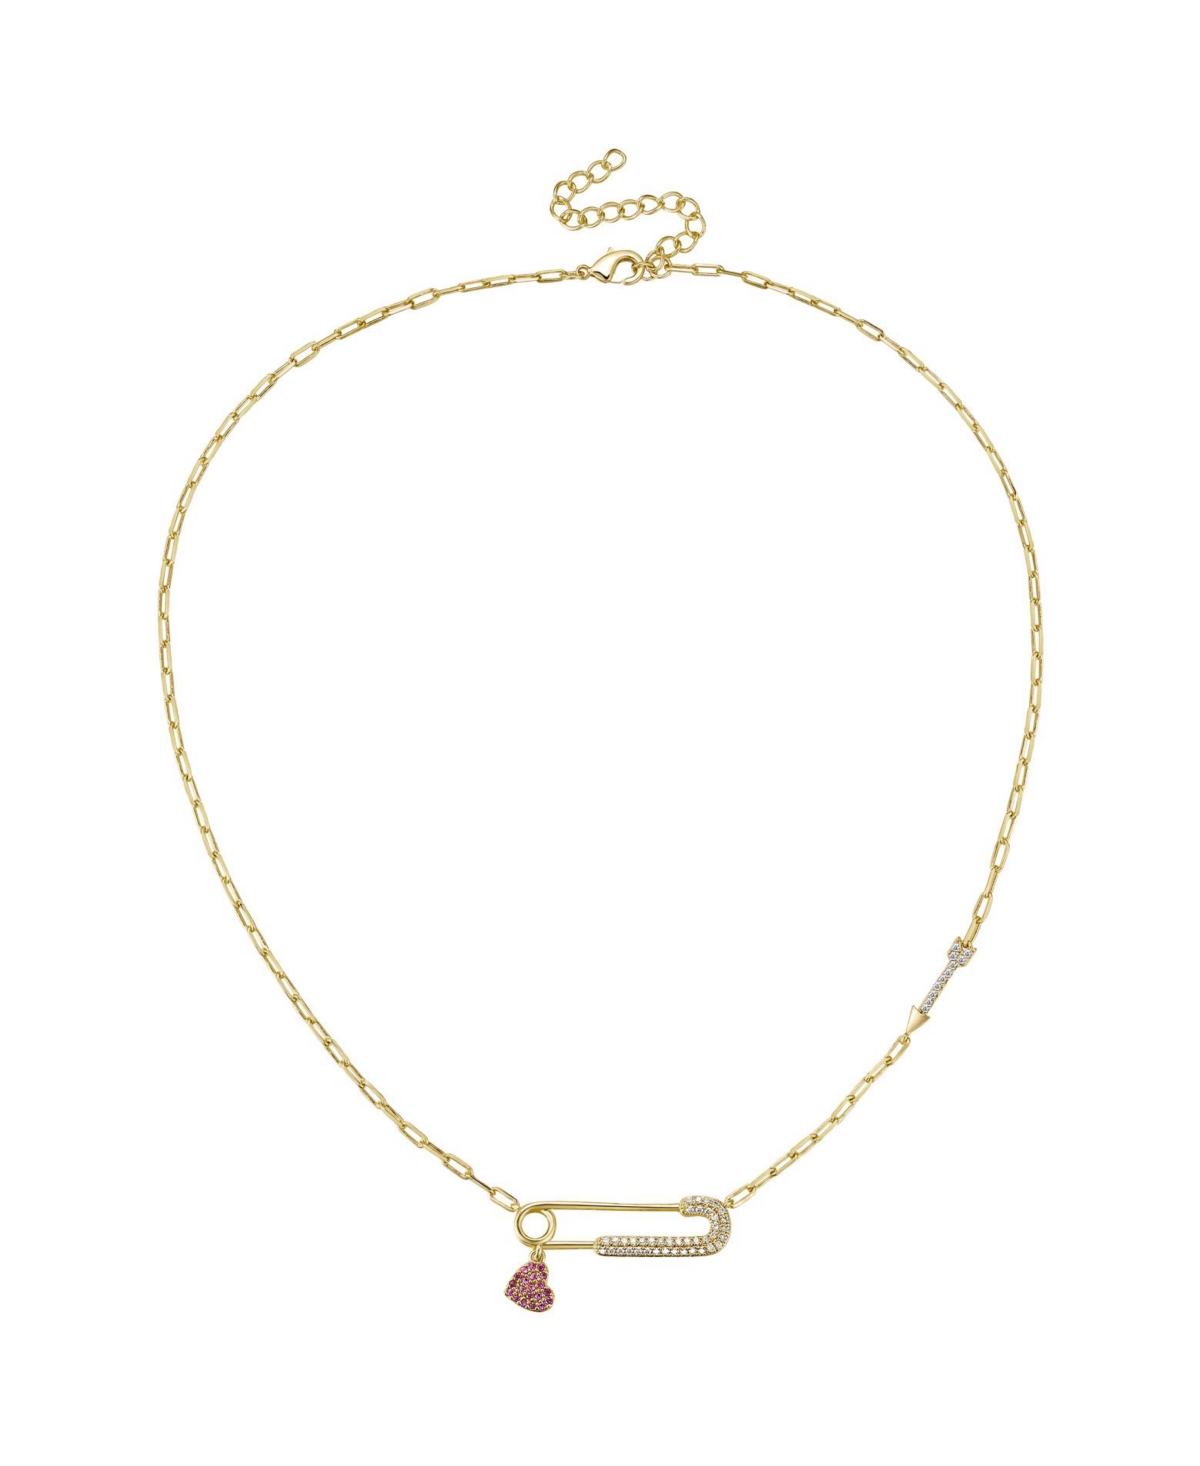 Gigi Girl teens/ Young Adults 14k Gold Plated with Ruby & Cubic Zirconia Heart Charm Dangle Paperclip Adjustable Length Necklace - Gold